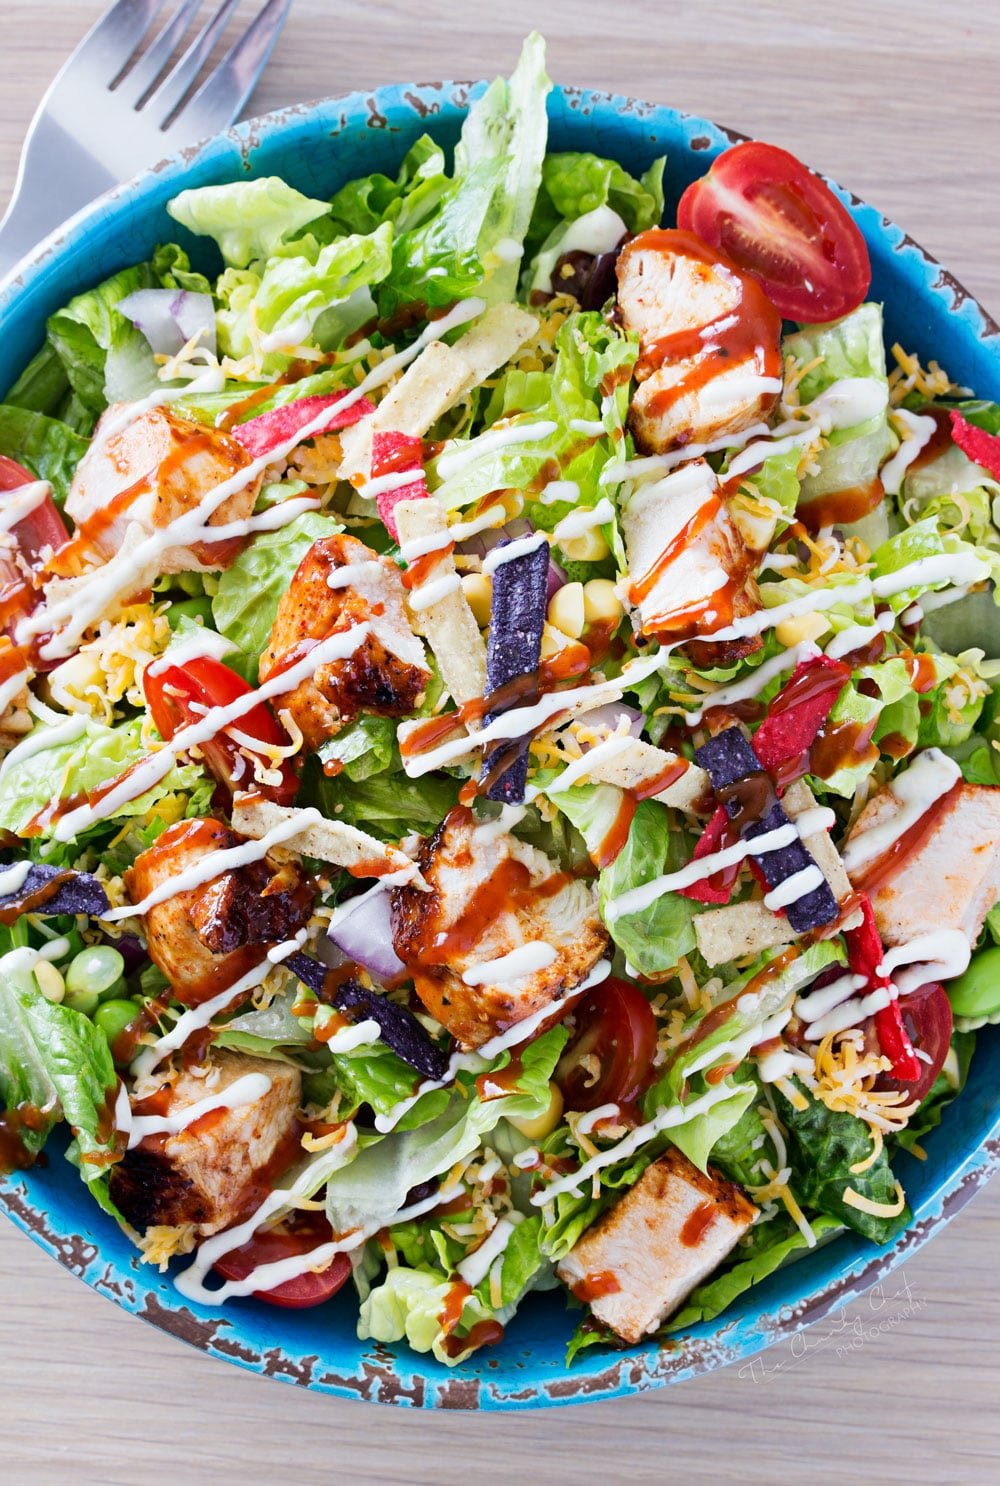 BBQ Chicken Salad | This fresh and crisp bbq chicken salad is packed with veggies, tender grilled chicken, and topped with bbq sauce and a green chile ranch dressing! | http://thechunkychef.com